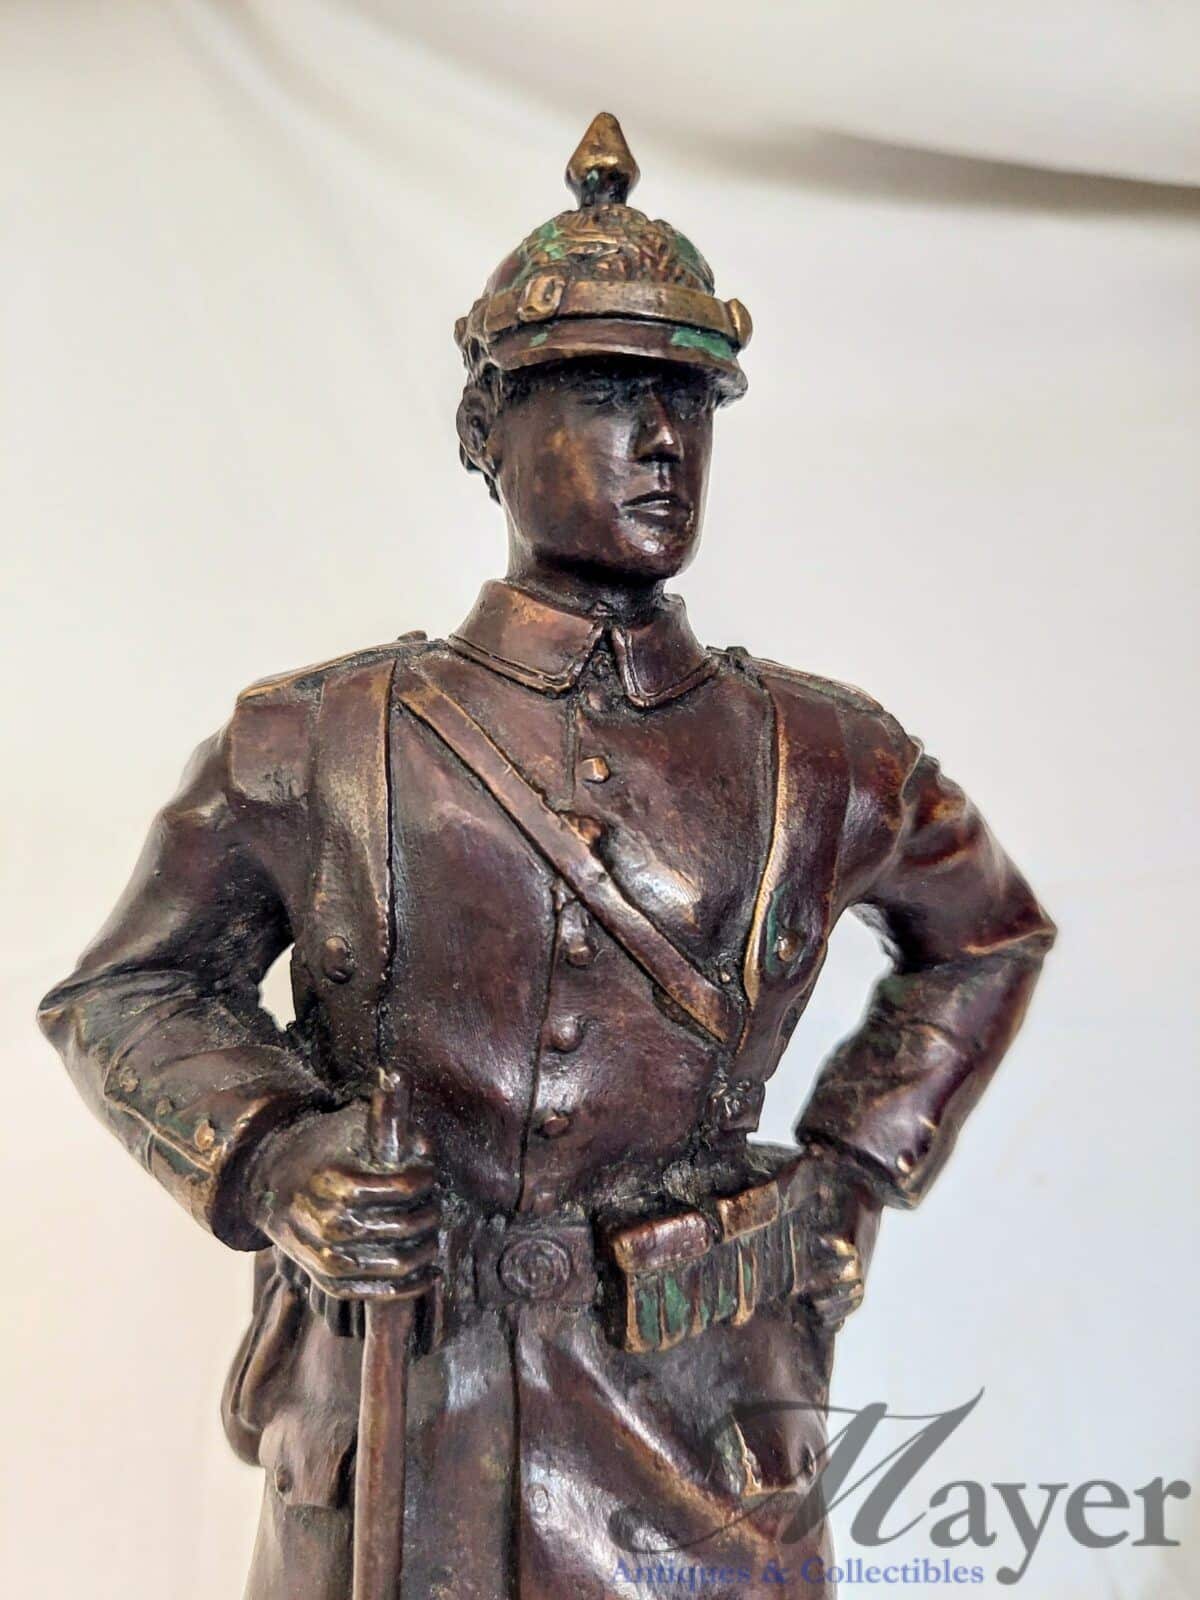 A young Austro-Hungarian soldier bronze sculpture symbolizing and honoring the slaughter of the youth, the millions of young soldiers who were killed during World War One.